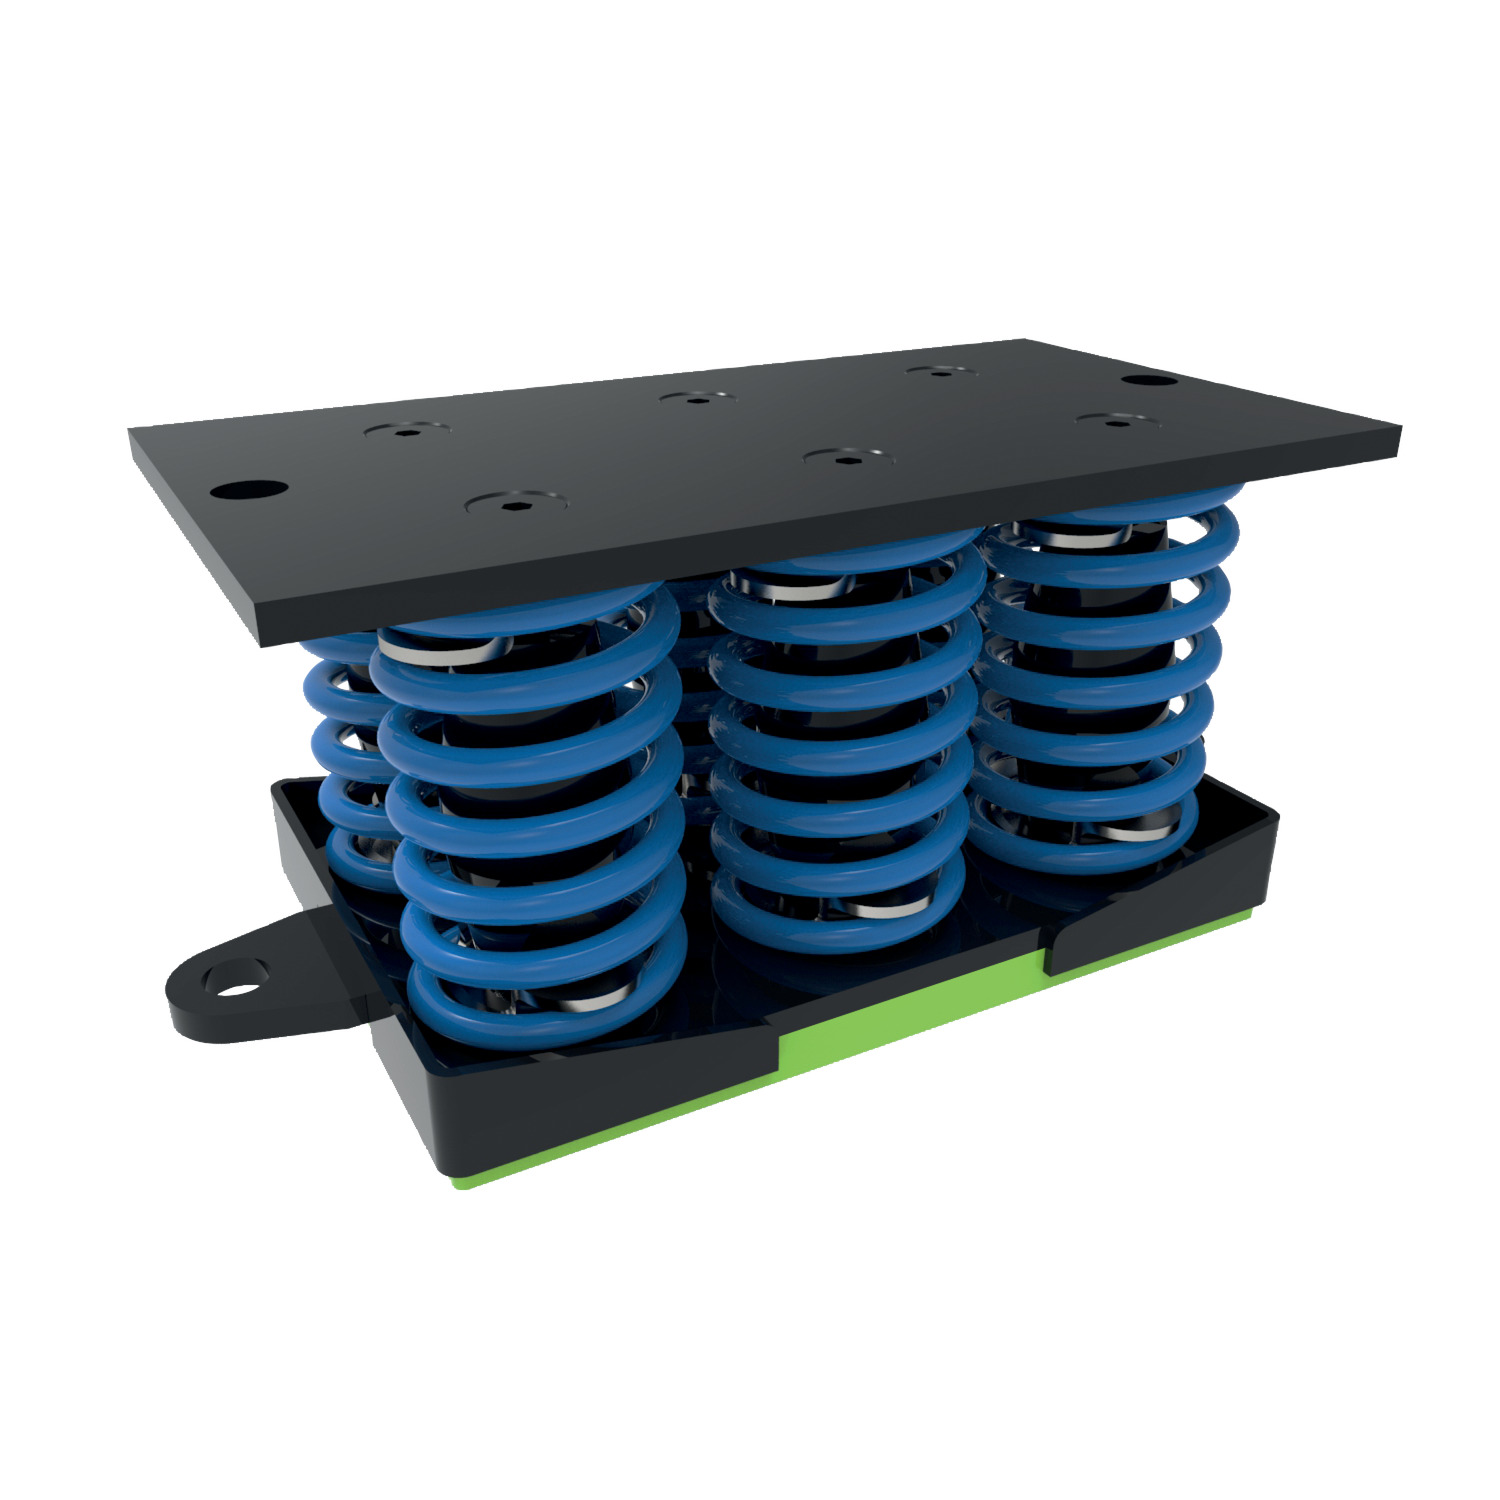 Spring Vibration Damper six spring The sylomer mat that these dampers incorporate, isolates the mid-high frequency vibrations which are transmitted through the coils of the metal springs.